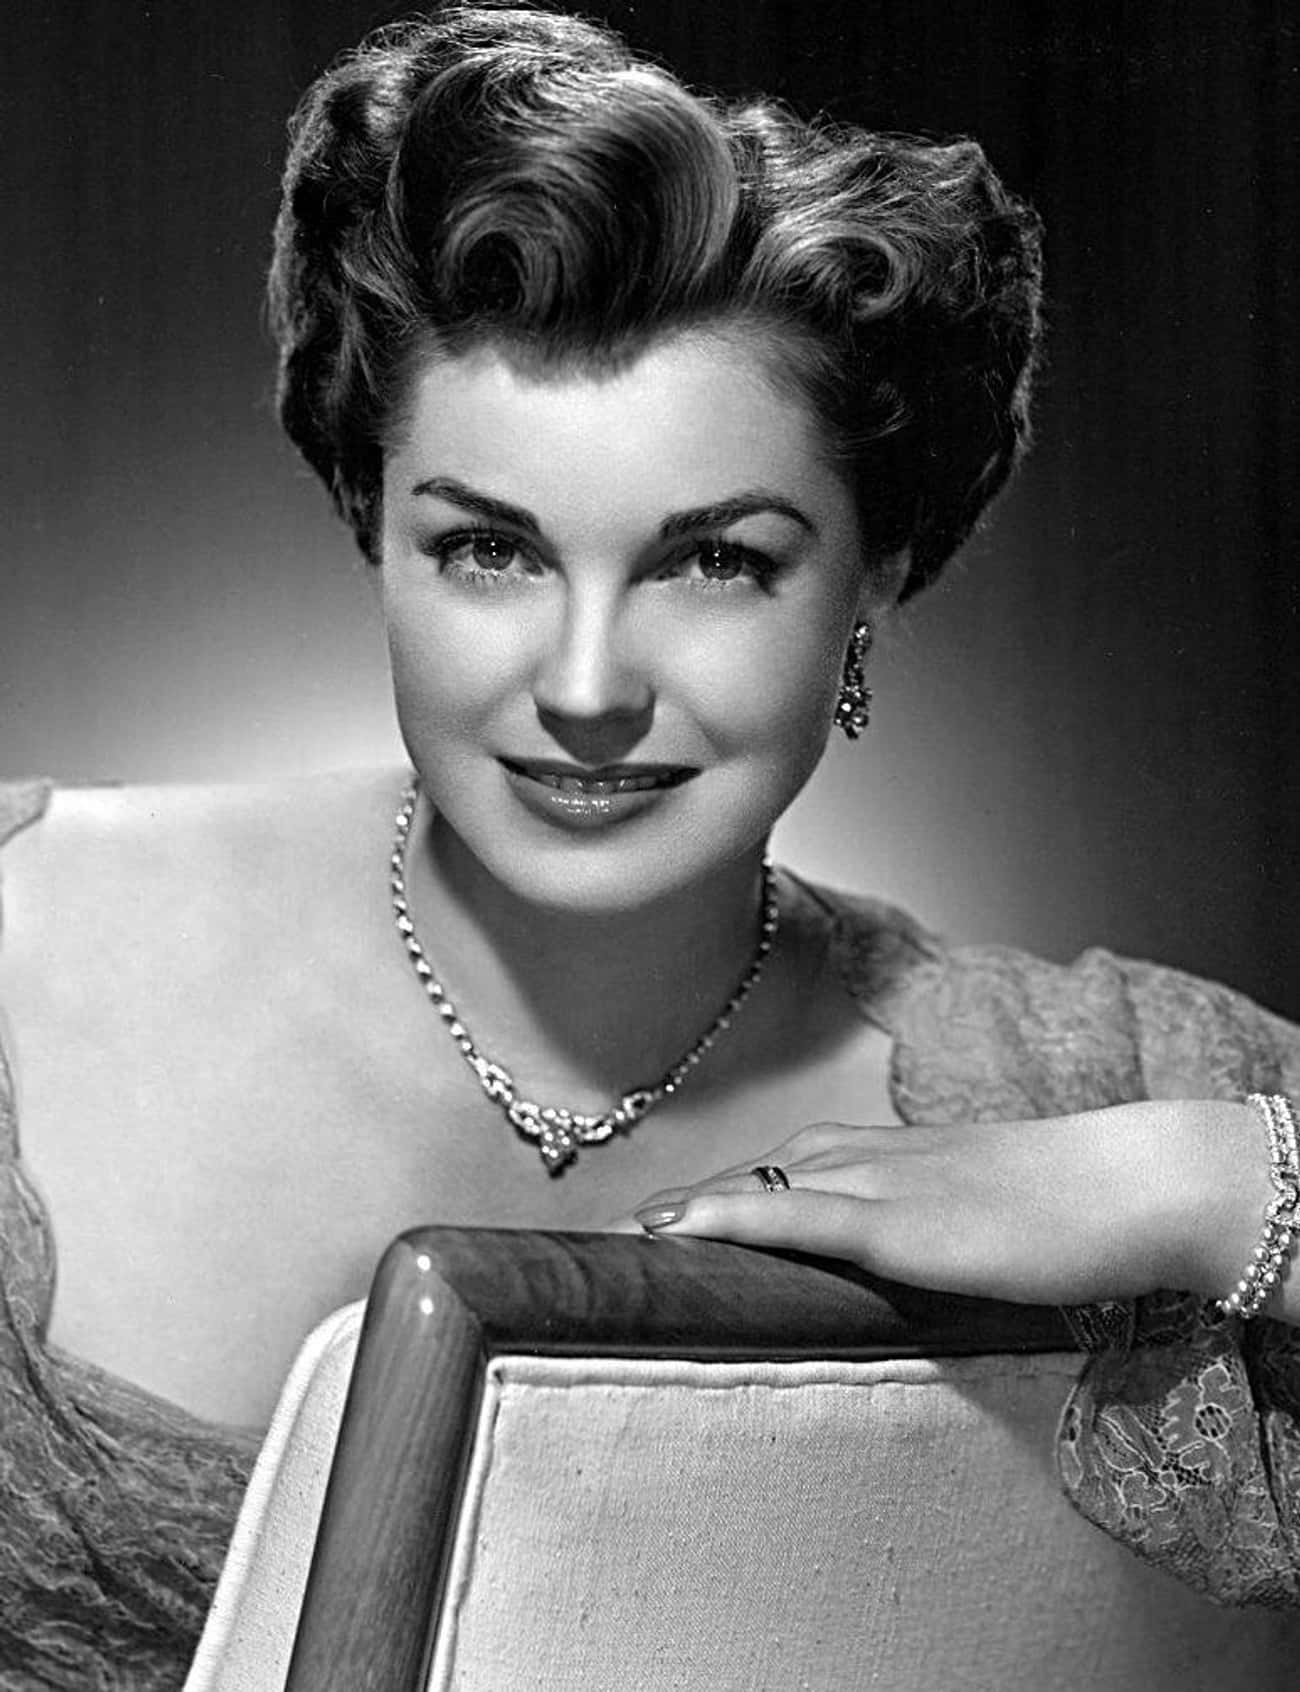 Esther Williams Said Working With Him Was 'Pure Misery'